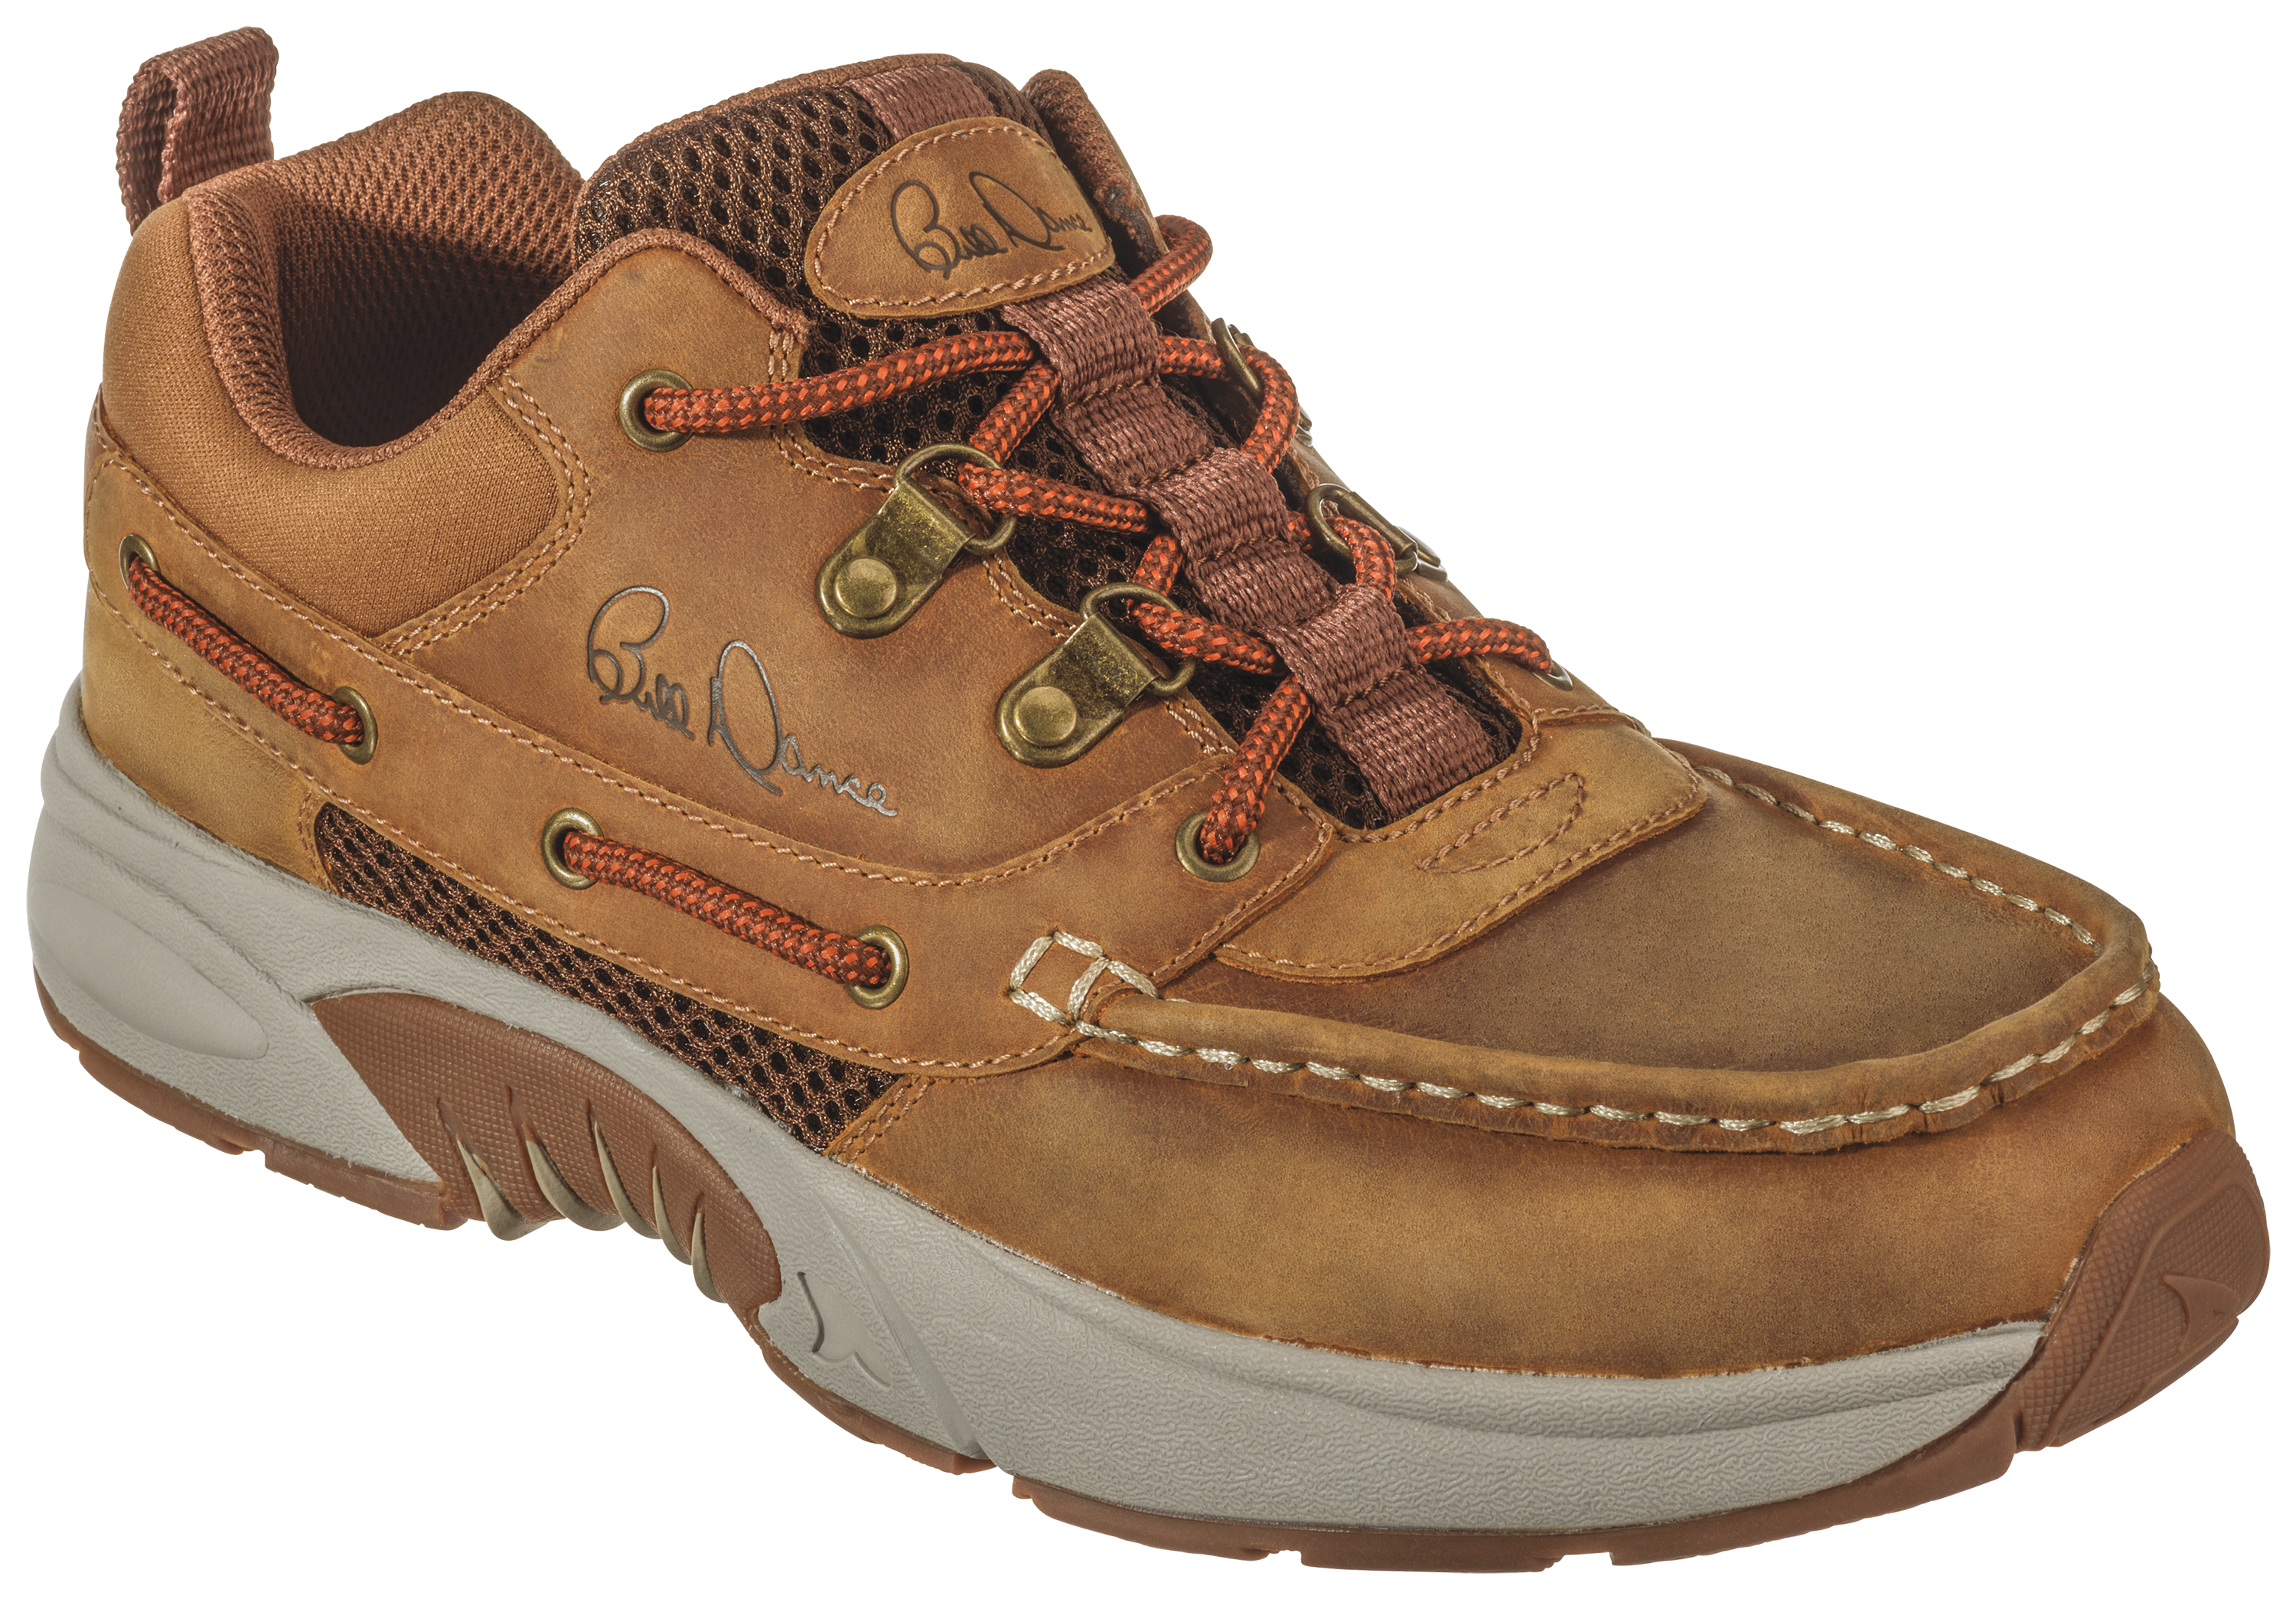 Bill Dance Pro Performance Fishing Shoes for Men by Rugged Shark - Brown - 9M